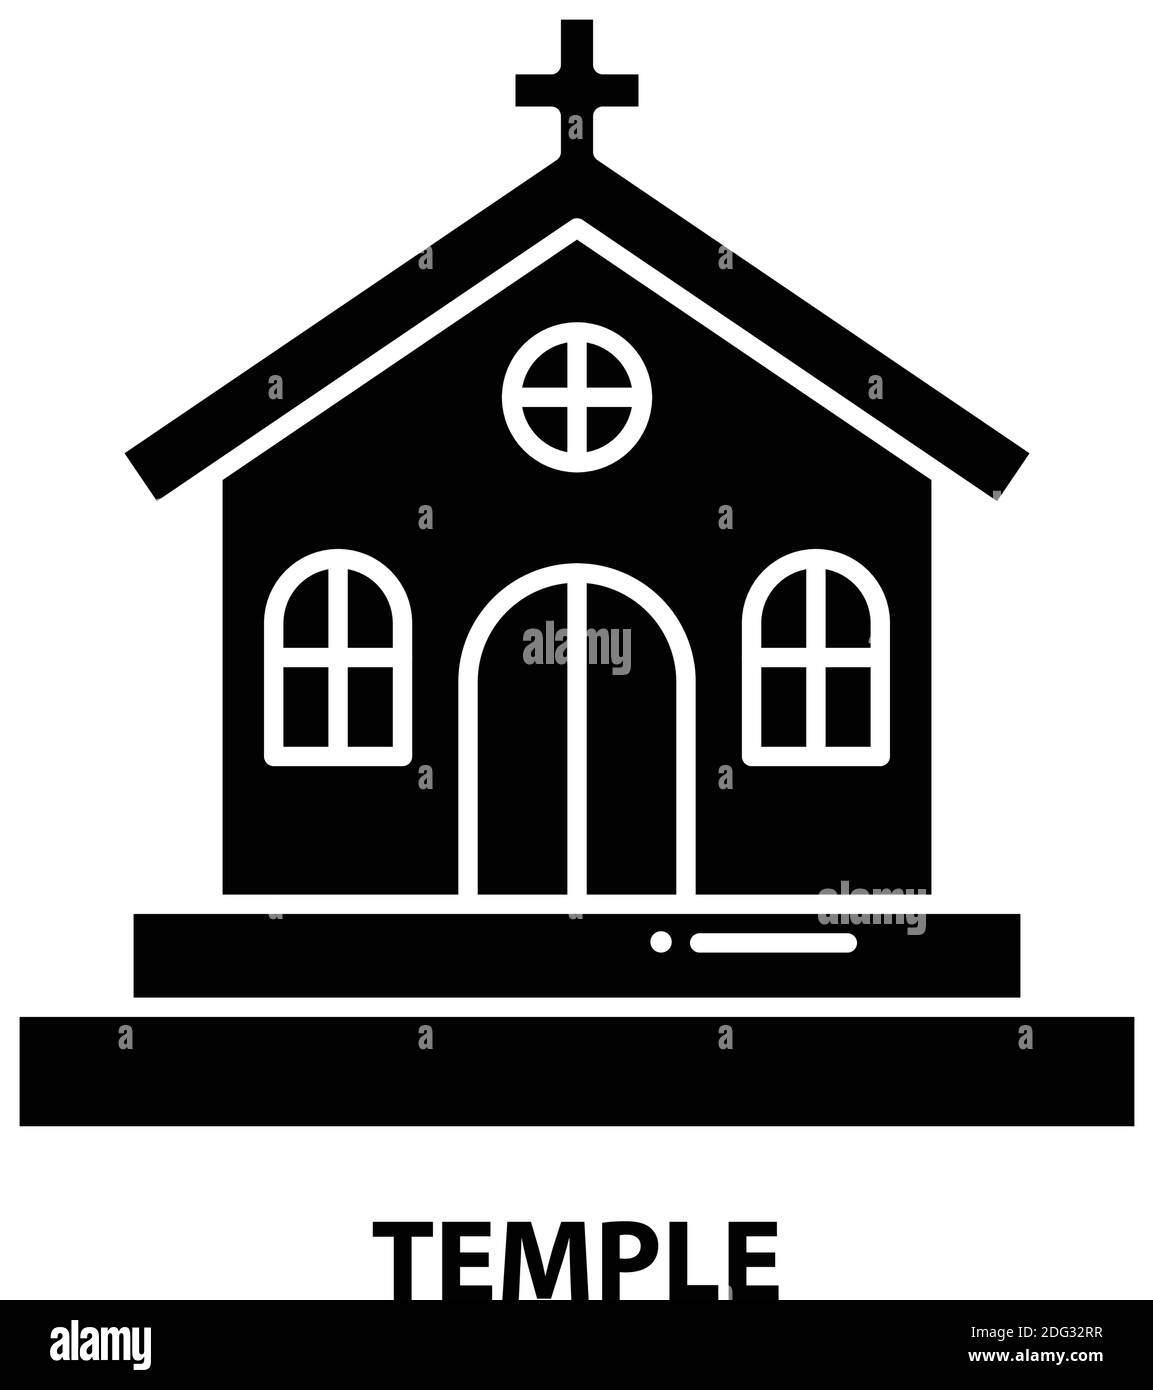 temple icon, black vector sign with editable strokes, concept illustration Stock Vector